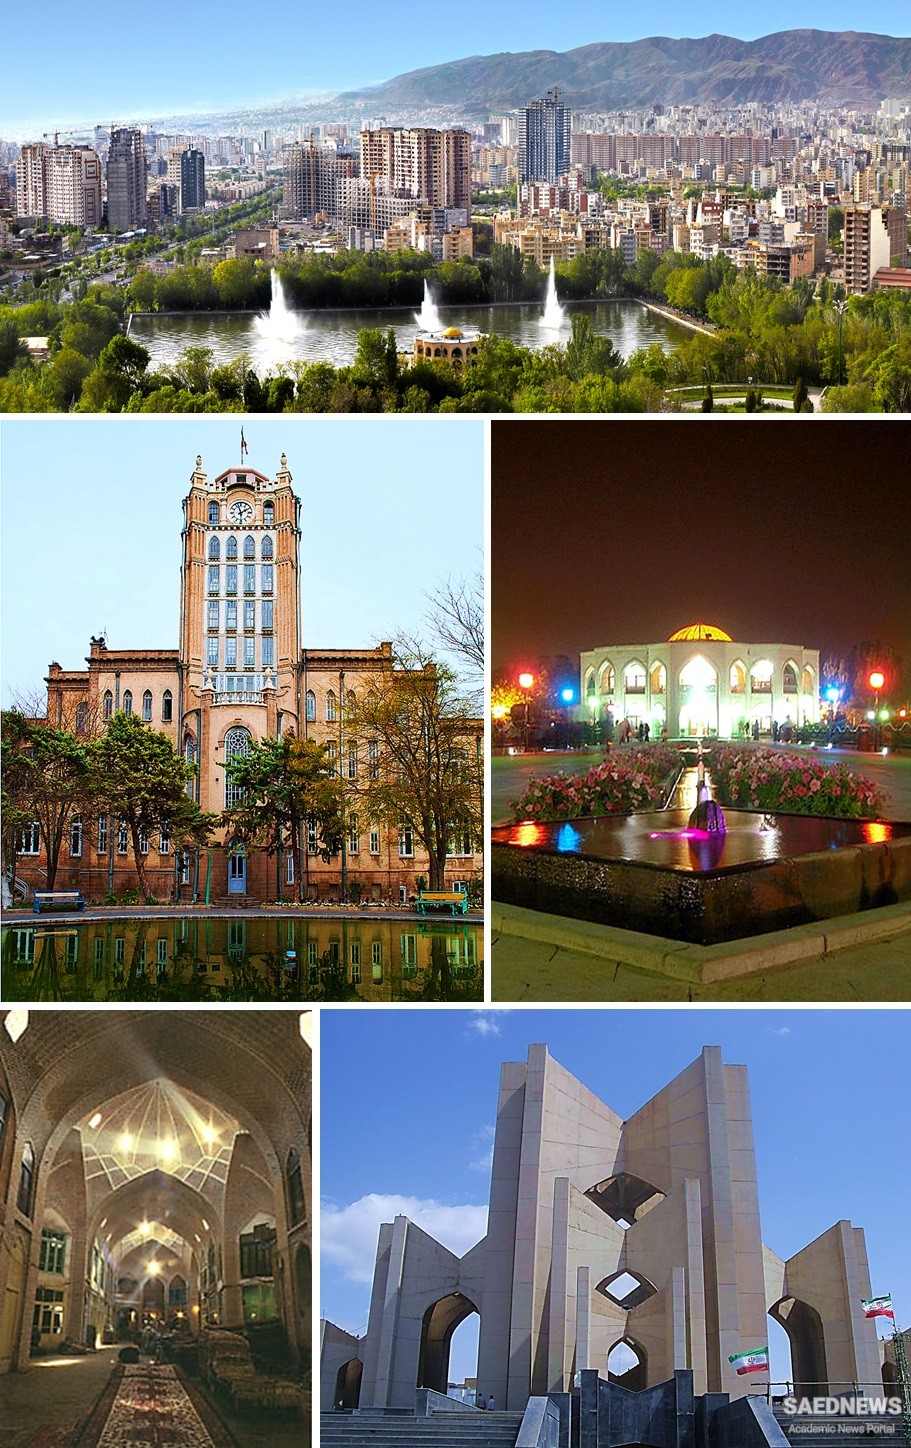 Tabriz: the City of Pioneers with Millennial History